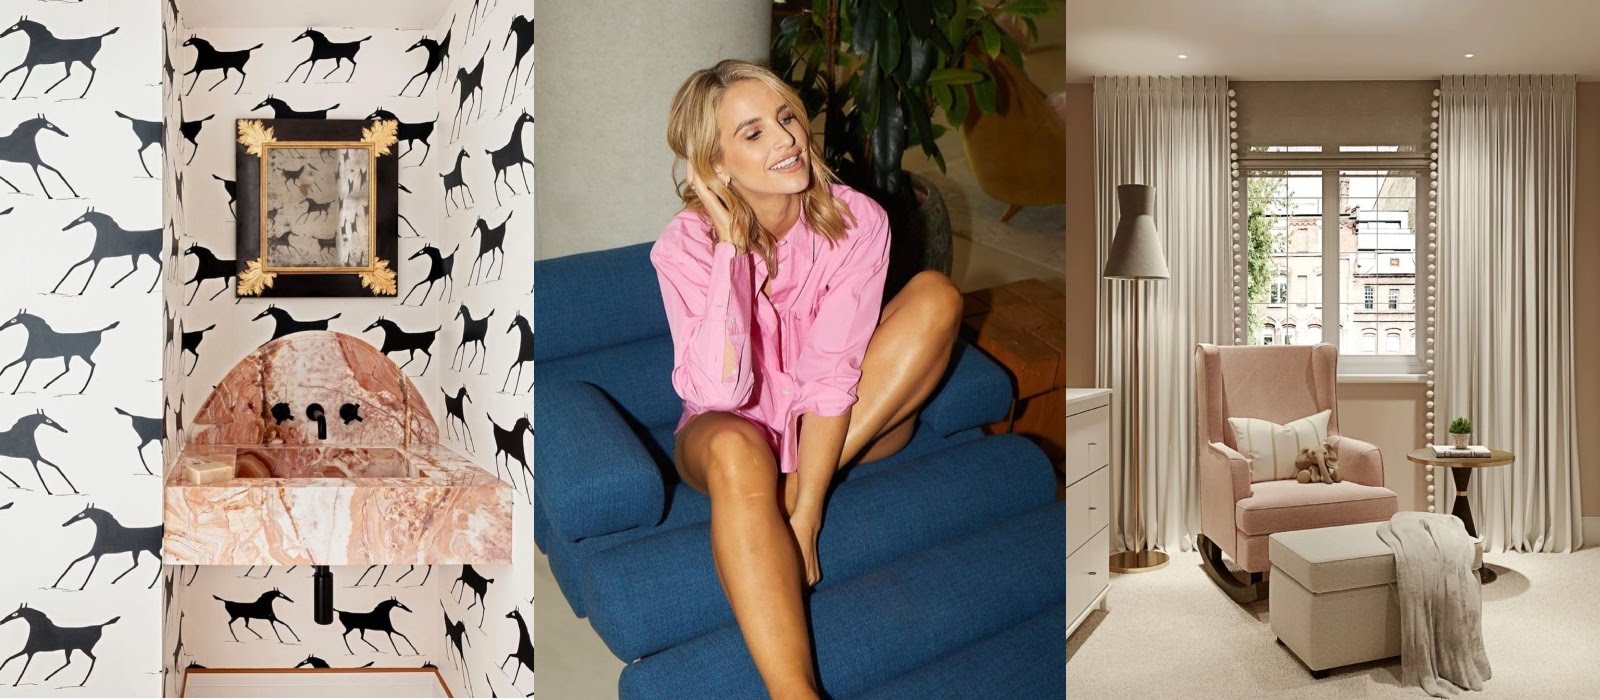 6 places Vogue Williams looks to for colourful home inspiration